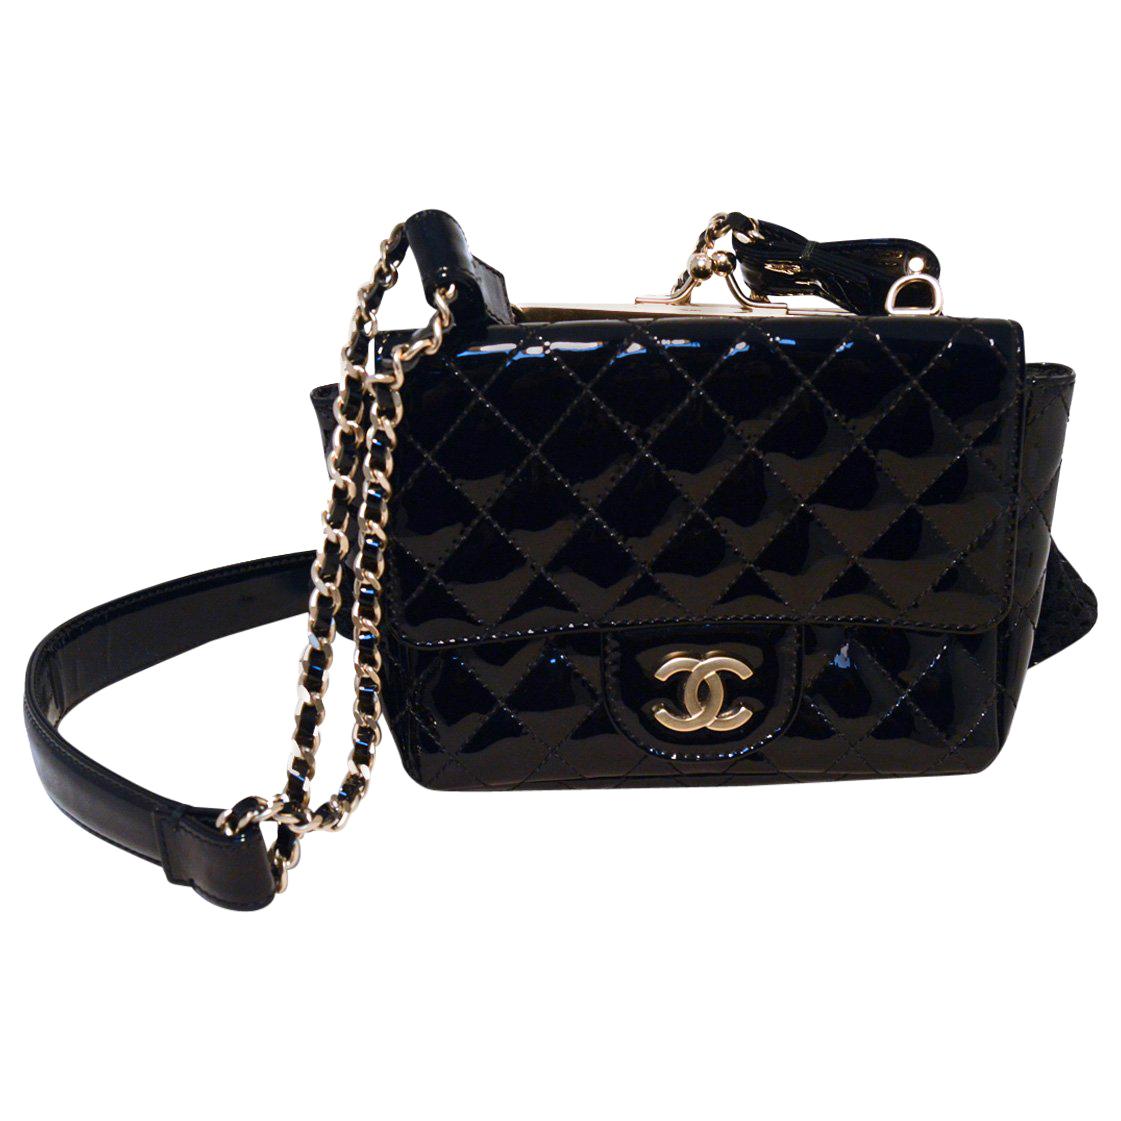 Chanel Black Patent Leather Classic and Lace Pouch Shoulder Bag